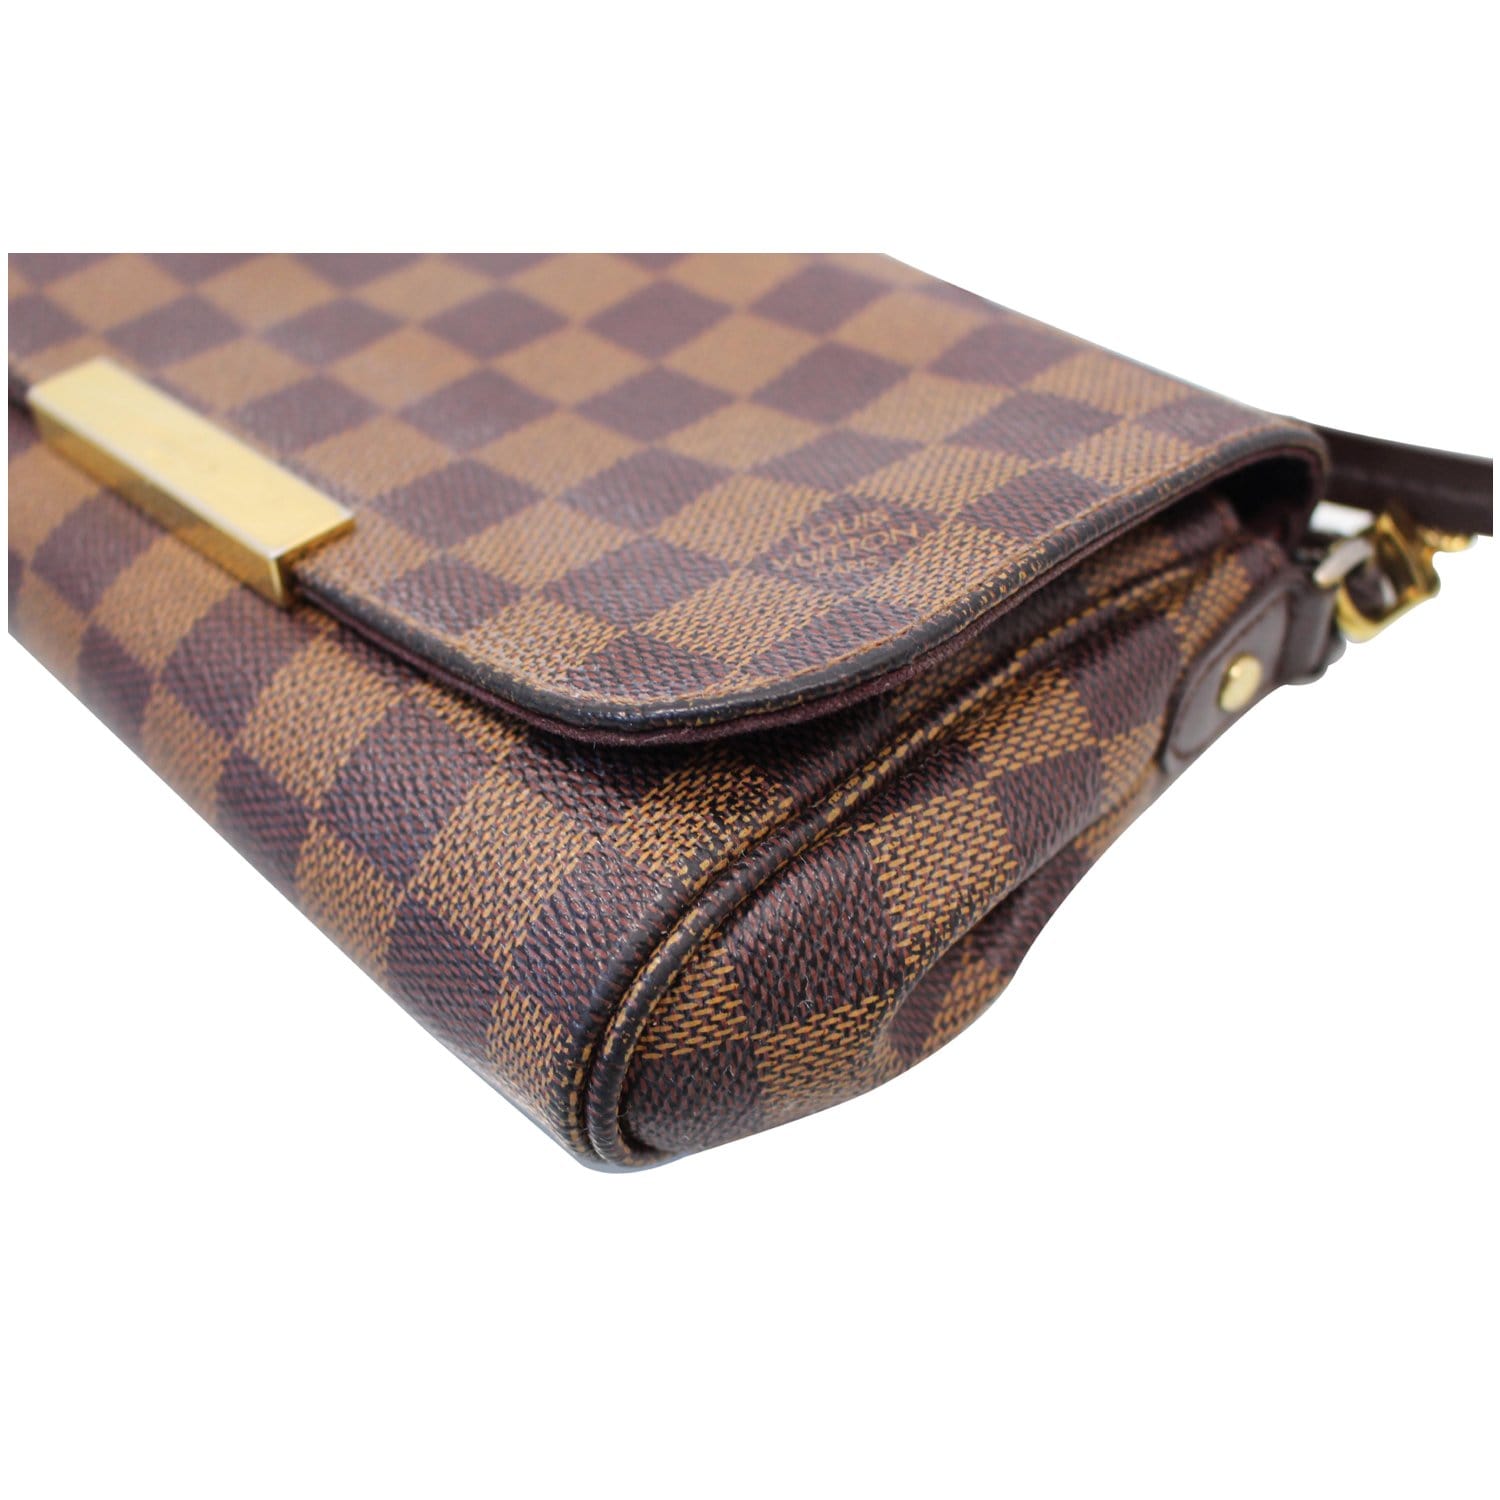 LOUIS VUITTON Favorite PM Damier Ebene Crossbody Clutch Discontinued /Sold  Out!